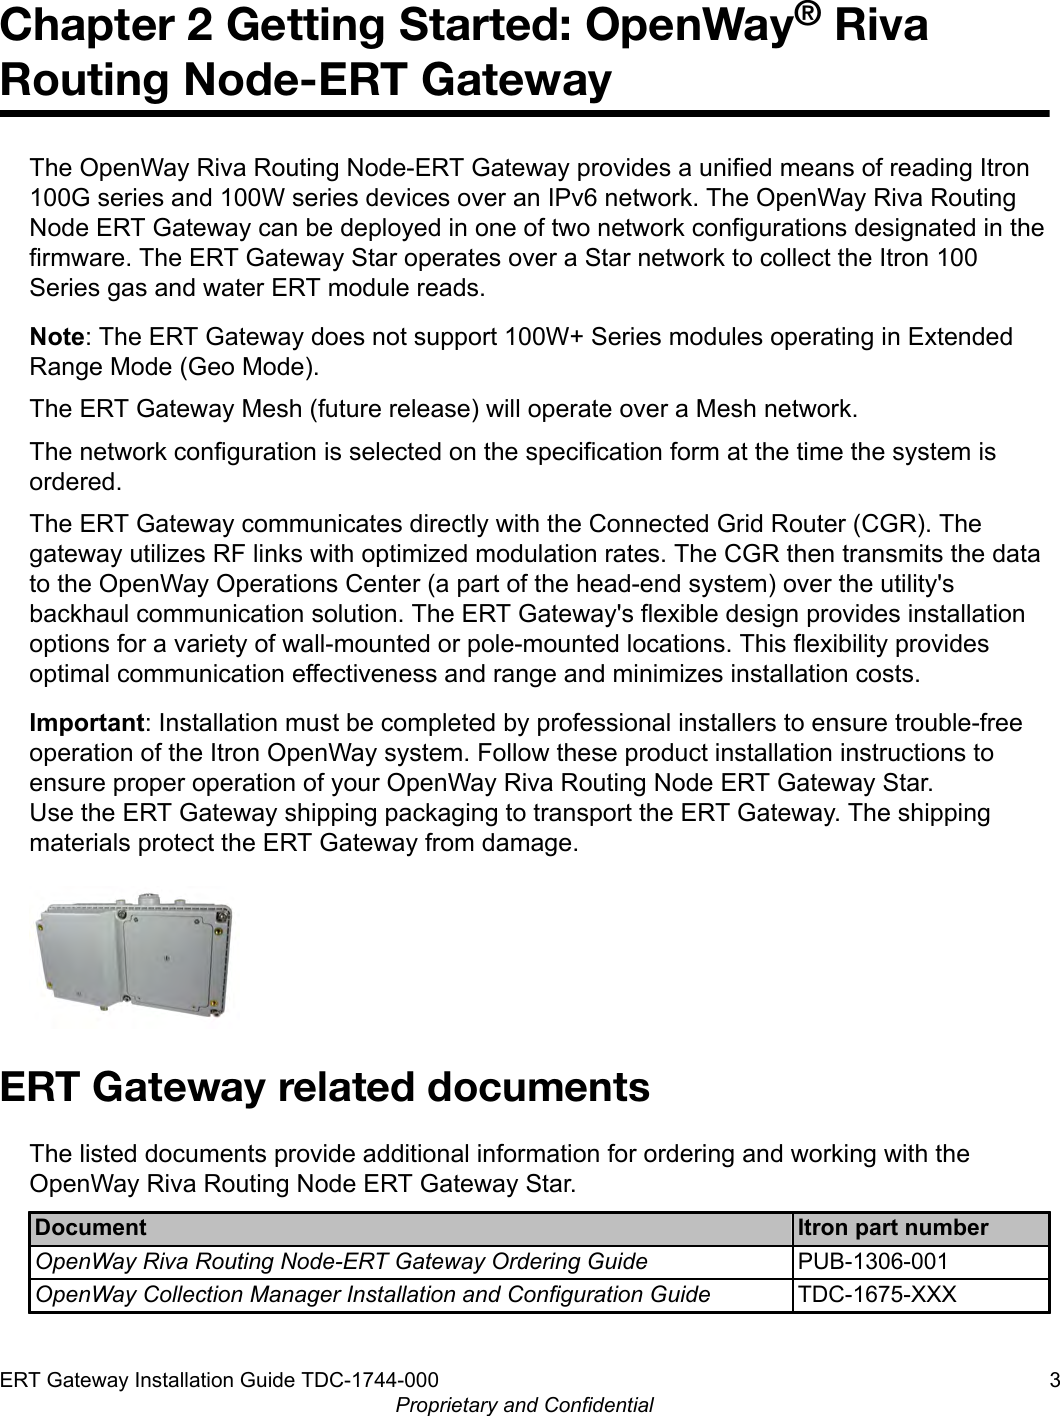 Chapter 2 Getting Started: OpenWay® RivaRouting Node-ERT GatewayThe OpenWay Riva Routing Node-ERT Gateway provides a unified means of reading Itron100G series and 100W series devices over an IPv6 network. The OpenWay Riva RoutingNode ERT Gateway can be deployed in one of two network configurations designated in thefirmware. The ERT Gateway Star operates over a Star network to collect the Itron 100Series gas and water ERT module reads.Note: The ERT Gateway does not support 100W+ Series modules operating in ExtendedRange Mode (Geo Mode).The ERT Gateway Mesh (future release) will operate over a Mesh network.The network configuration is selected on the specification form at the time the system isordered.The ERT Gateway communicates directly with the Connected Grid Router (CGR). Thegateway utilizes RF links with optimized modulation rates. The CGR then transmits the datato the OpenWay Operations Center (a part of the head-end system) over the utility&apos;sbackhaul communication solution. The ERT Gateway&apos;s flexible design provides installationoptions for a variety of wall-mounted or pole-mounted locations. This flexibility providesoptimal communication effectiveness and range and minimizes installation costs.Important: Installation must be completed by professional installers to ensure trouble-freeoperation of the Itron OpenWay system. Follow these product installation instructions toensure proper operation of your OpenWay Riva Routing Node ERT Gateway Star.Use the ERT Gateway shipping packaging to transport the ERT Gateway. The shippingmaterials protect the ERT Gateway from damage.ERT Gateway related documentsThe listed documents provide additional information for ordering and working with theOpenWay Riva Routing Node ERT Gateway Star.Document Itron part numberOpenWay Riva Routing Node-ERT Gateway Ordering Guide PUB-1306-001OpenWay Collection Manager Installation and Configuration Guide TDC-1675-XXXERT Gateway Installation Guide TDC-1744-000 3Proprietary and Confidential